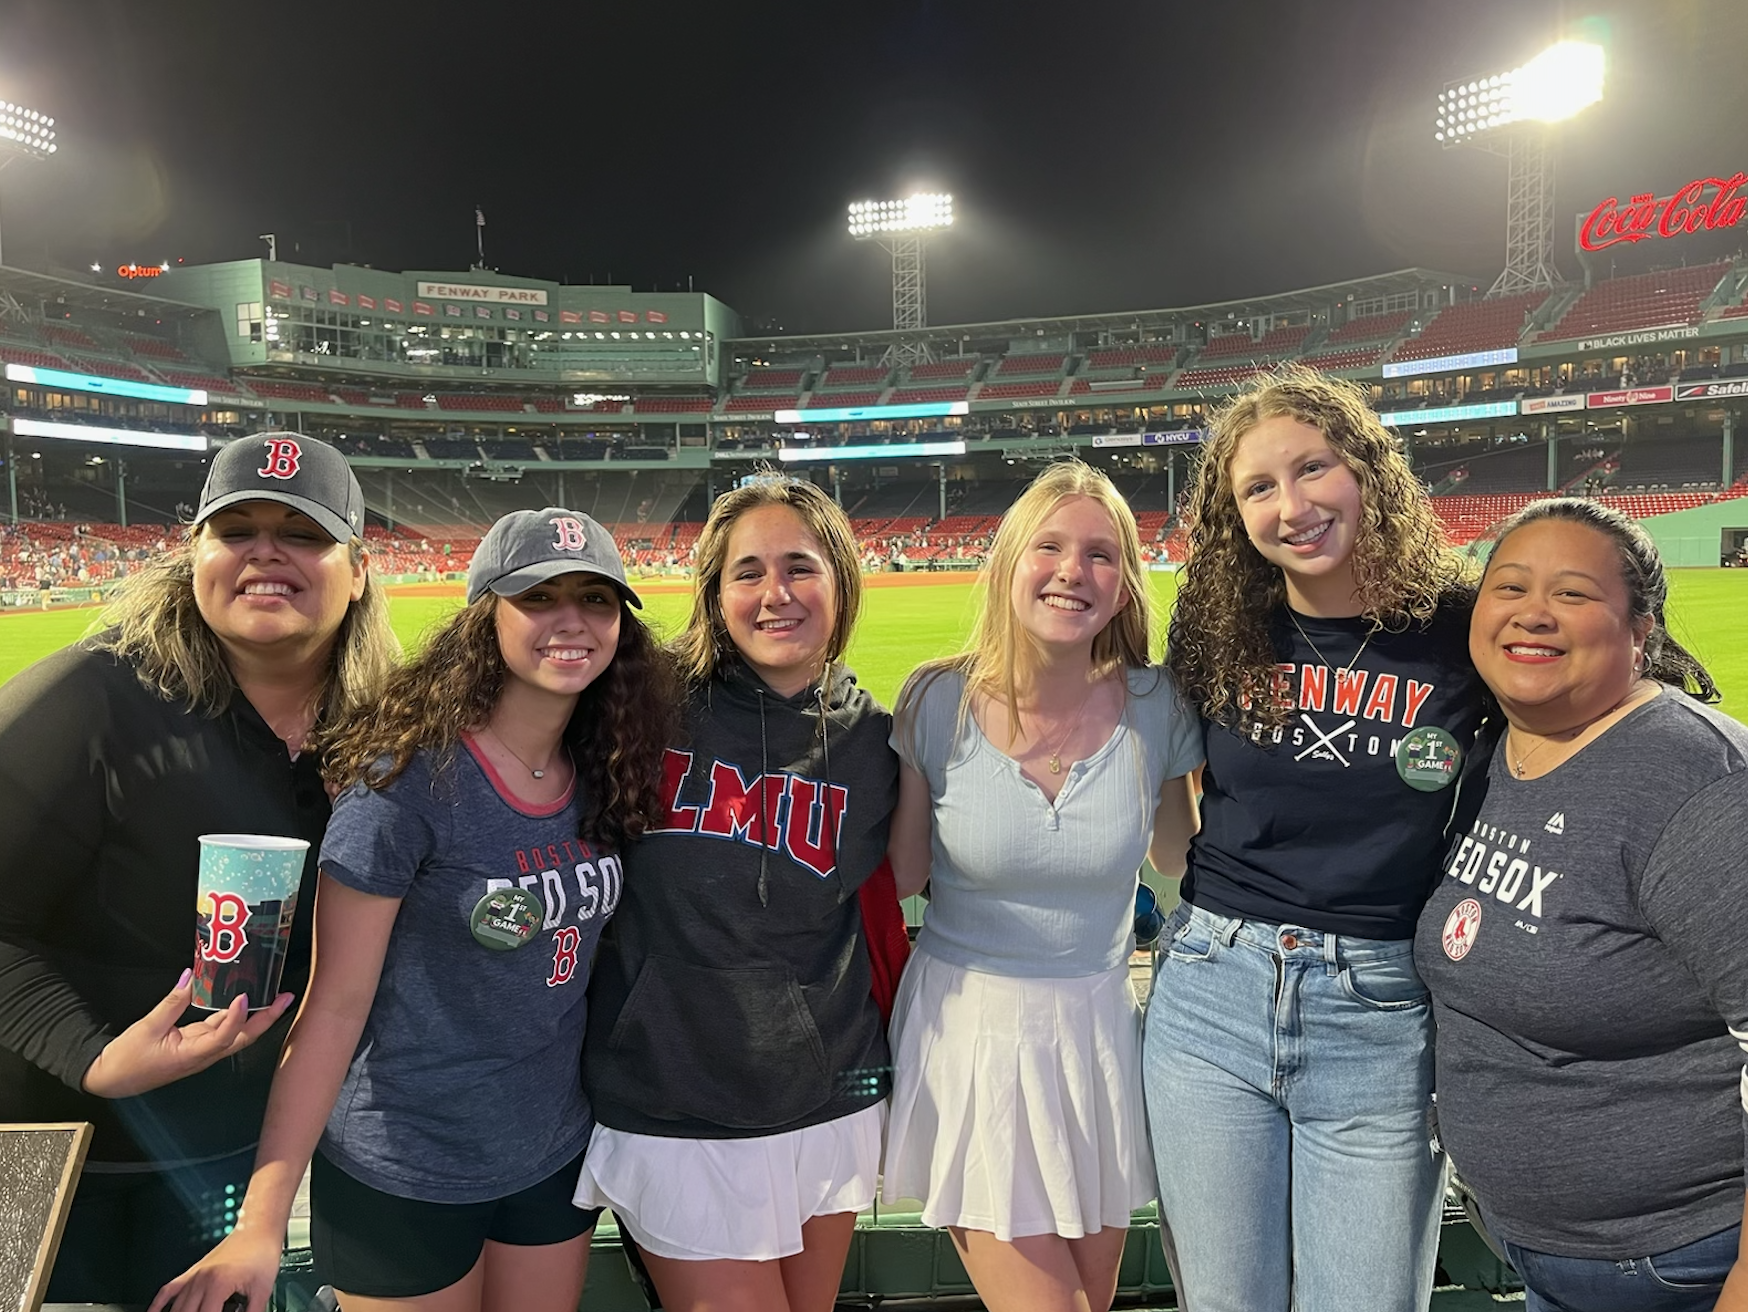 NDB’s attendees explored Boston, spending a night out at a Red Sox baseball game.